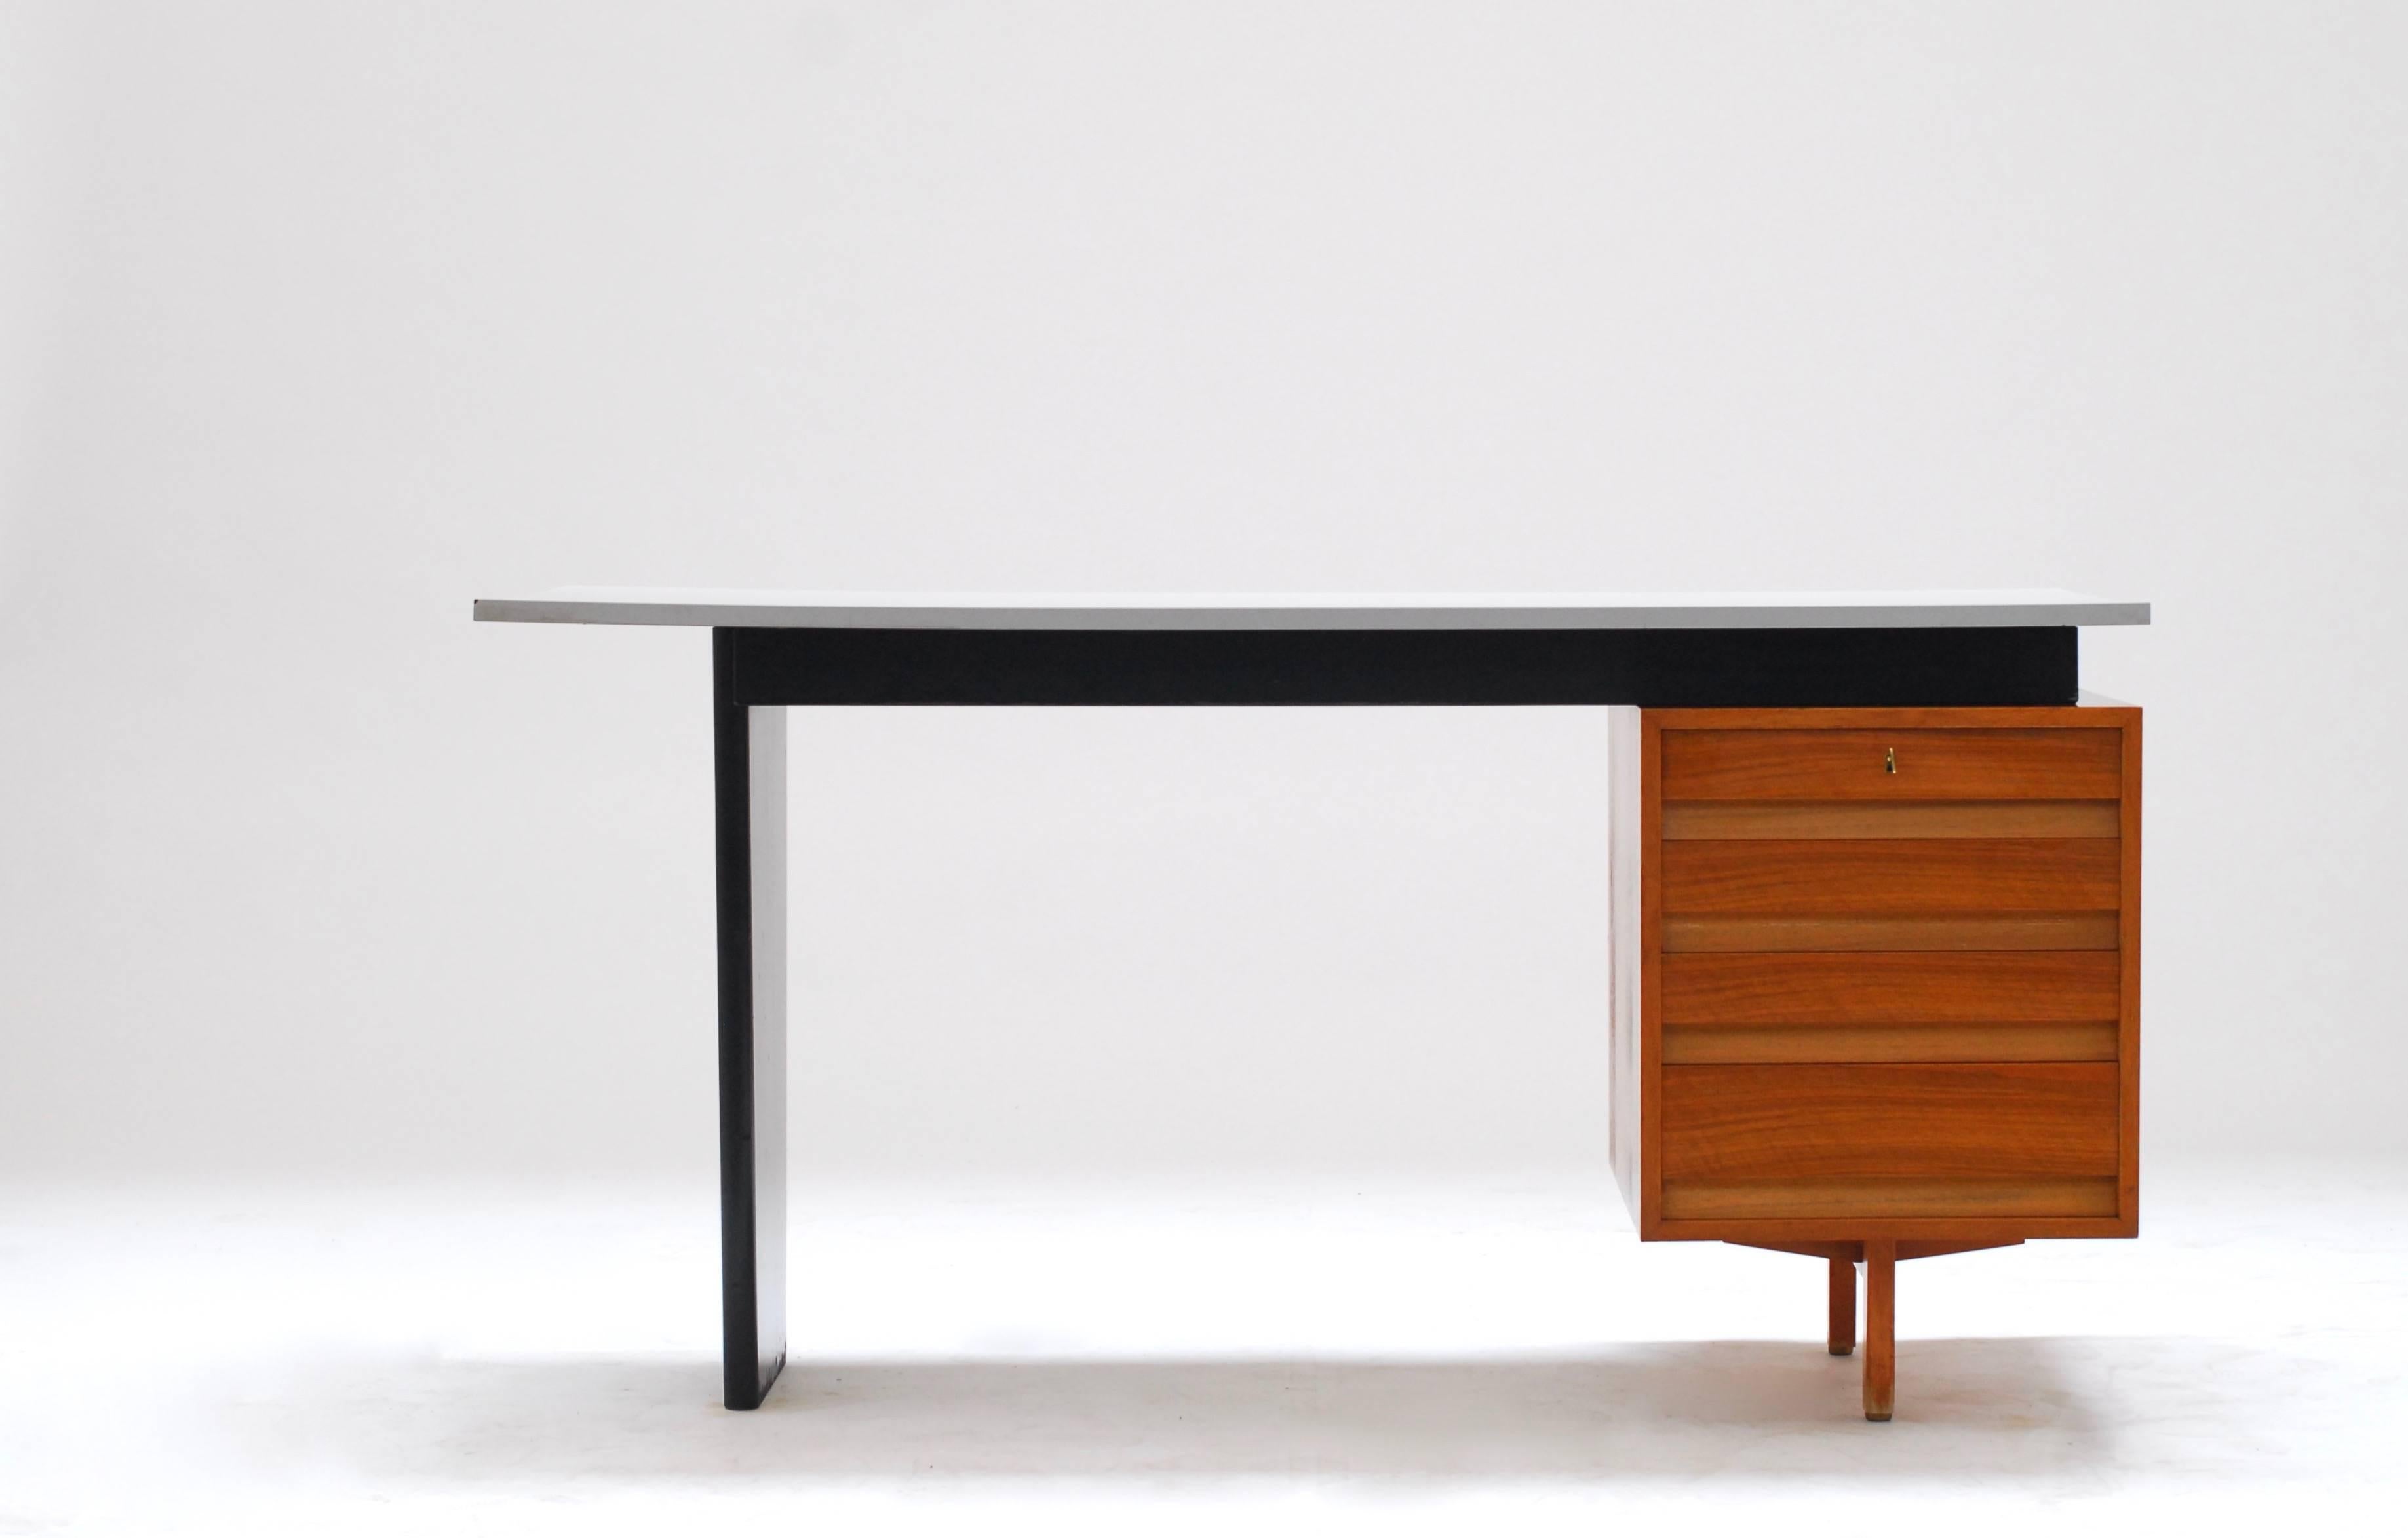 Unusual and rare desk by Jos De Mey for the company Van Den Berghe -Pauvers. With it's small proportions the desk is very practical and easy to position in a space.
The assymetrical design and the contrasting colors on the other hand give a very